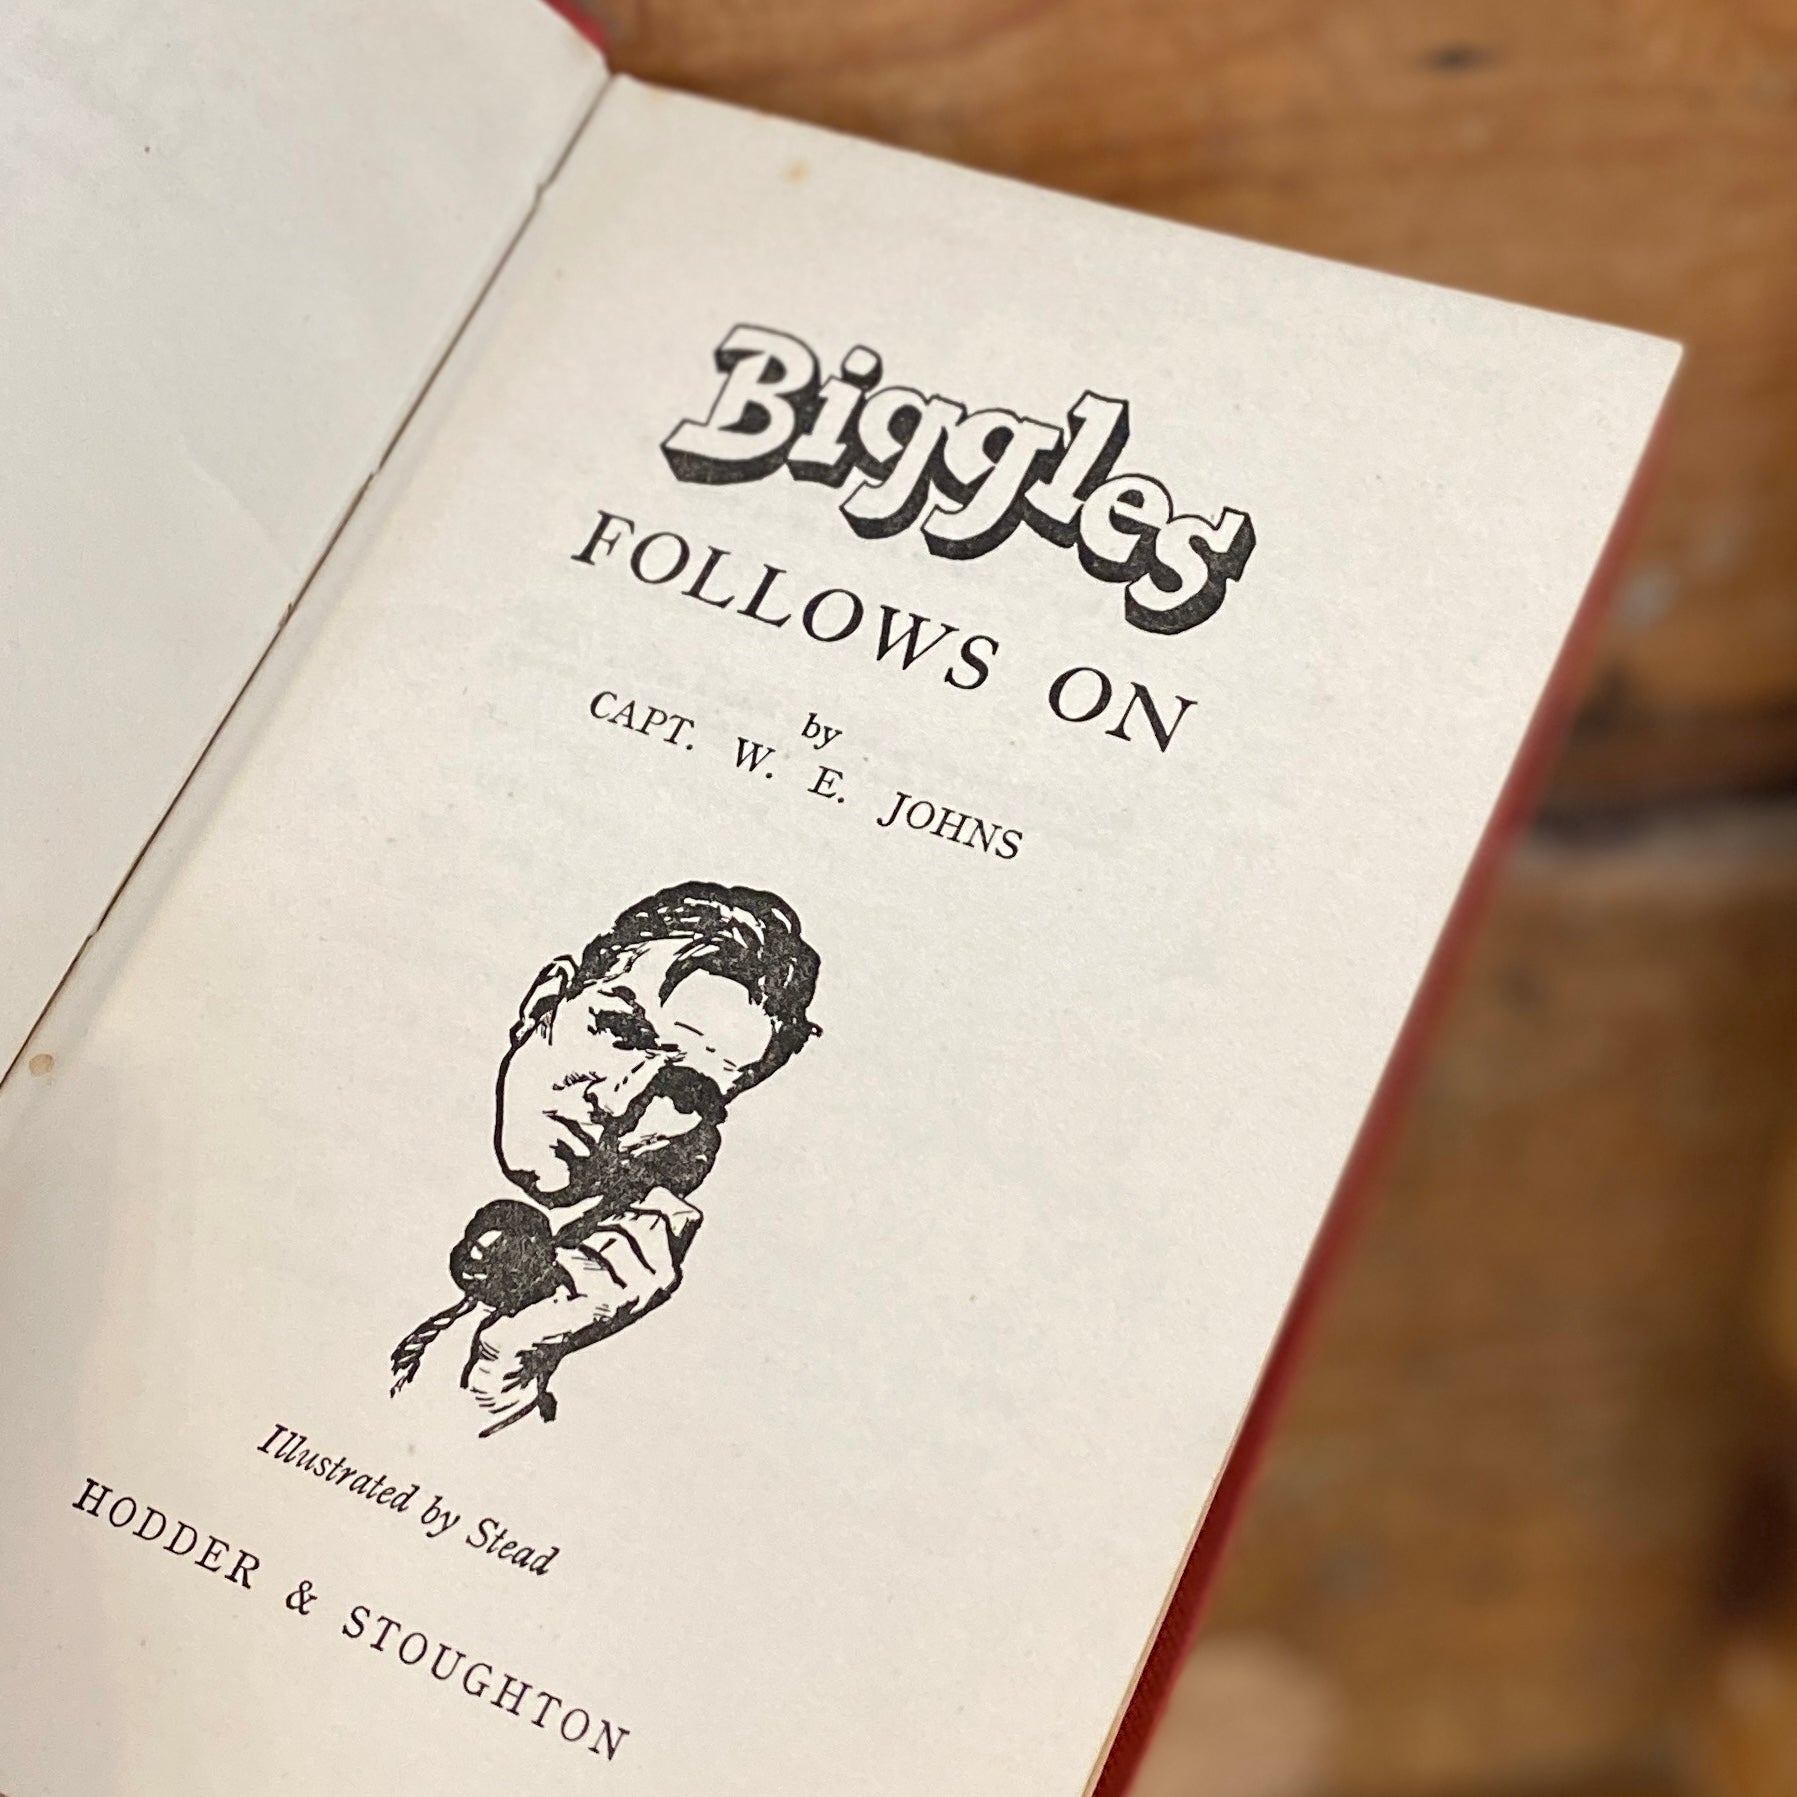 Biggles Follows On by Capt. W. E. Johns Vintage Book